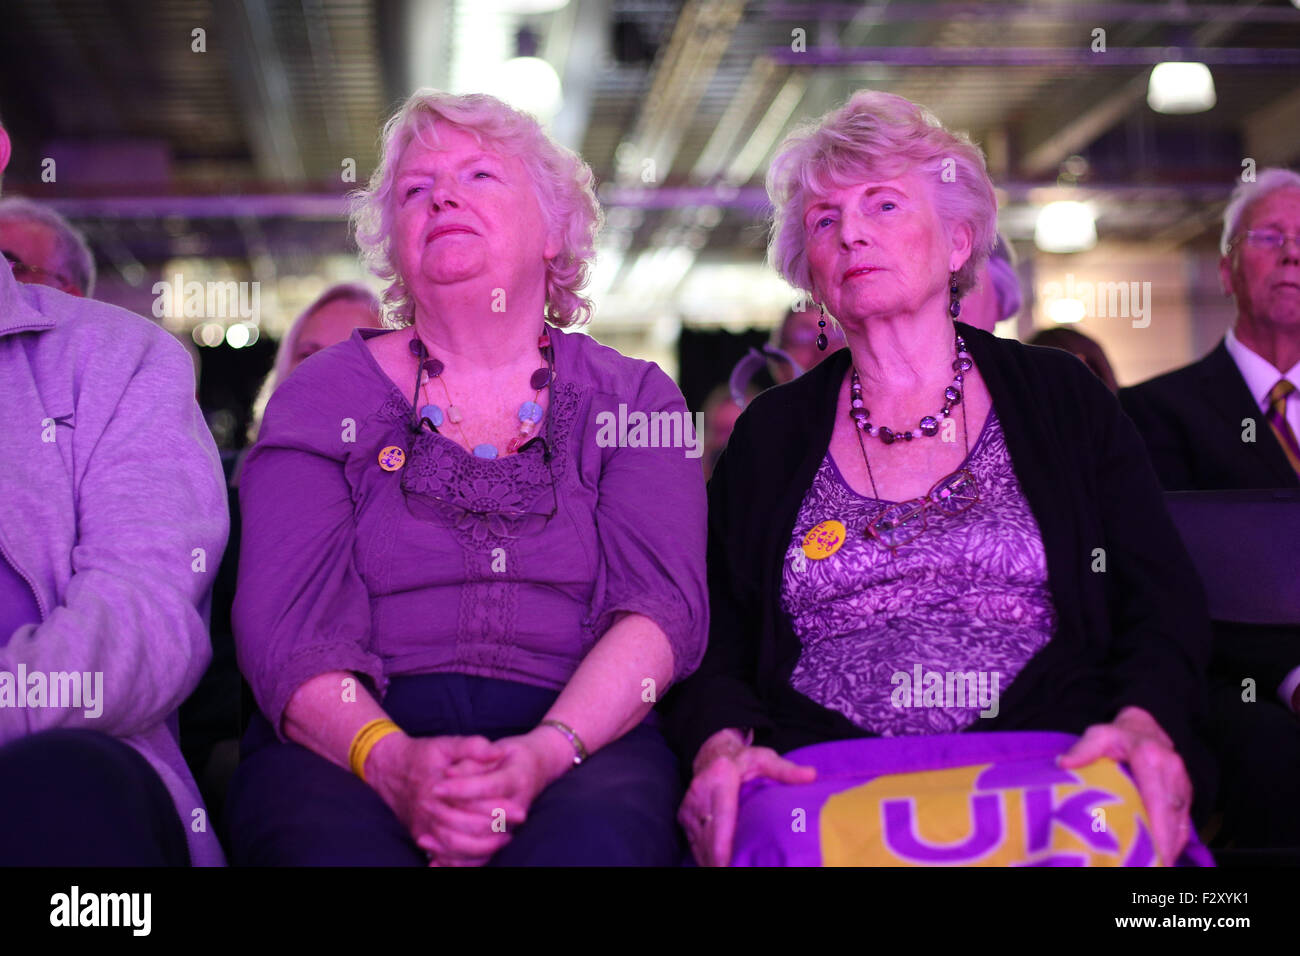 Doncaster, South Yorkshire, UK. 25th September, 2015. Supporters listen to guest speakers at the UKIP National Conference in Doncaster South Yorkshire, UK. 25th September 2015. The party's annual conference was the stage for the unveiling of a new campaign force called 'Leave EU'. Consisting of pressure groups and think tanks with thousands of activists between them it will aim to end the UK’s ties with Brussels.  Ian Hinchliffe / /Alamy Live News Stock Photo